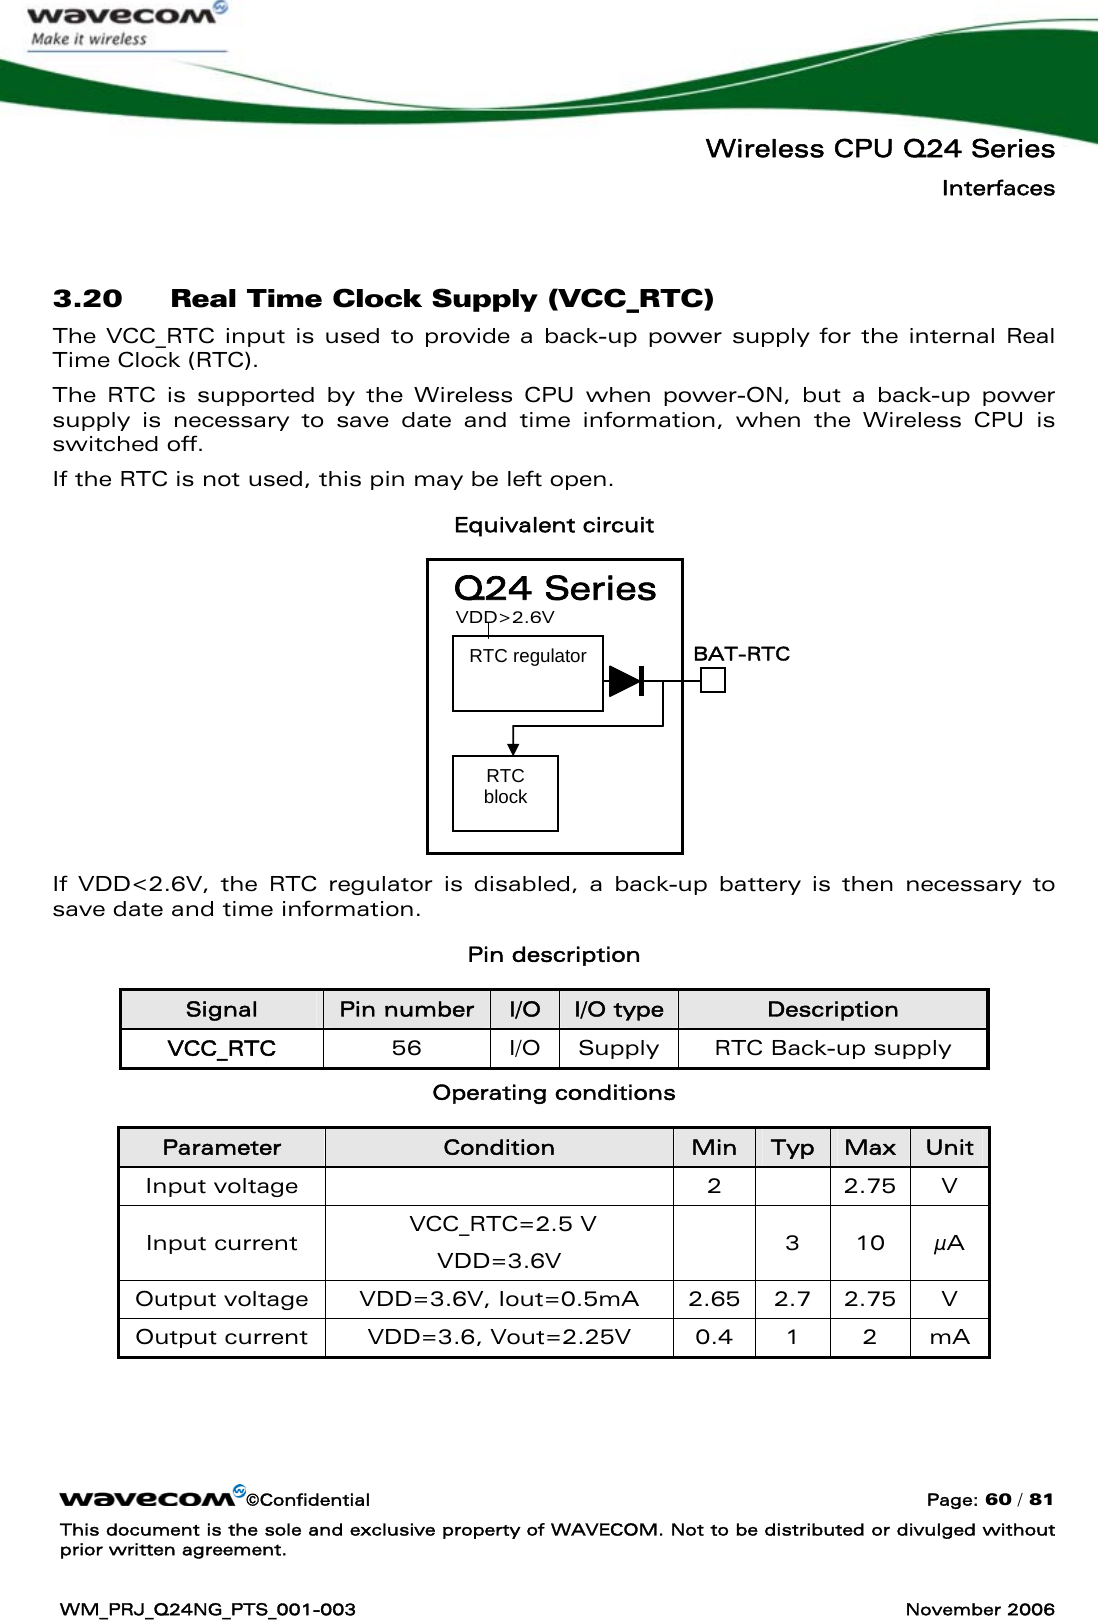   Wireless CPU Q24 Series Interfaces ©Confidential  Page: 60 / 81 This document is the sole and exclusive property of WAVECOM. Not to be distributed or divulged without prior written agreement.  WM_PRJ_Q24NG_PTS_001-003  November 2006   3.20 Real Time Clock Supply (VCC_RTC) The VCC_RTC input is used to provide a back-up power supply for the internal Real Time Clock (RTC).  The RTC is supported by the Wireless CPU when power-ON, but a back-up power supply is necessary to save date and time information, when the Wireless CPU is switched off. If the RTC is not used, this pin may be left open. Equivalent circuit          If VDD&lt;2.6V, the RTC regulator is disabled, a back-up battery is then necessary to save date and time information. Pin description Signal  Pin number  I/O  I/O type  Description VCC_RTC  56  I/O  Supply  RTC Back-up supply Operating conditions Parameter  Condition  Min  Typ  Max  Unit Input voltage    2    2.75  V Input current   VCC_RTC=2.5 V VDD=3.6V   3 10 μA Output voltage  VDD=3.6V, Iout=0.5mA  2.65  2.7  2.75  V Output current  VDD=3.6, Vout=2.25V  0.4  1  2  mA Q24 Series RTC block RTC regulator  BAT-RTC VDD&gt;2.6V 